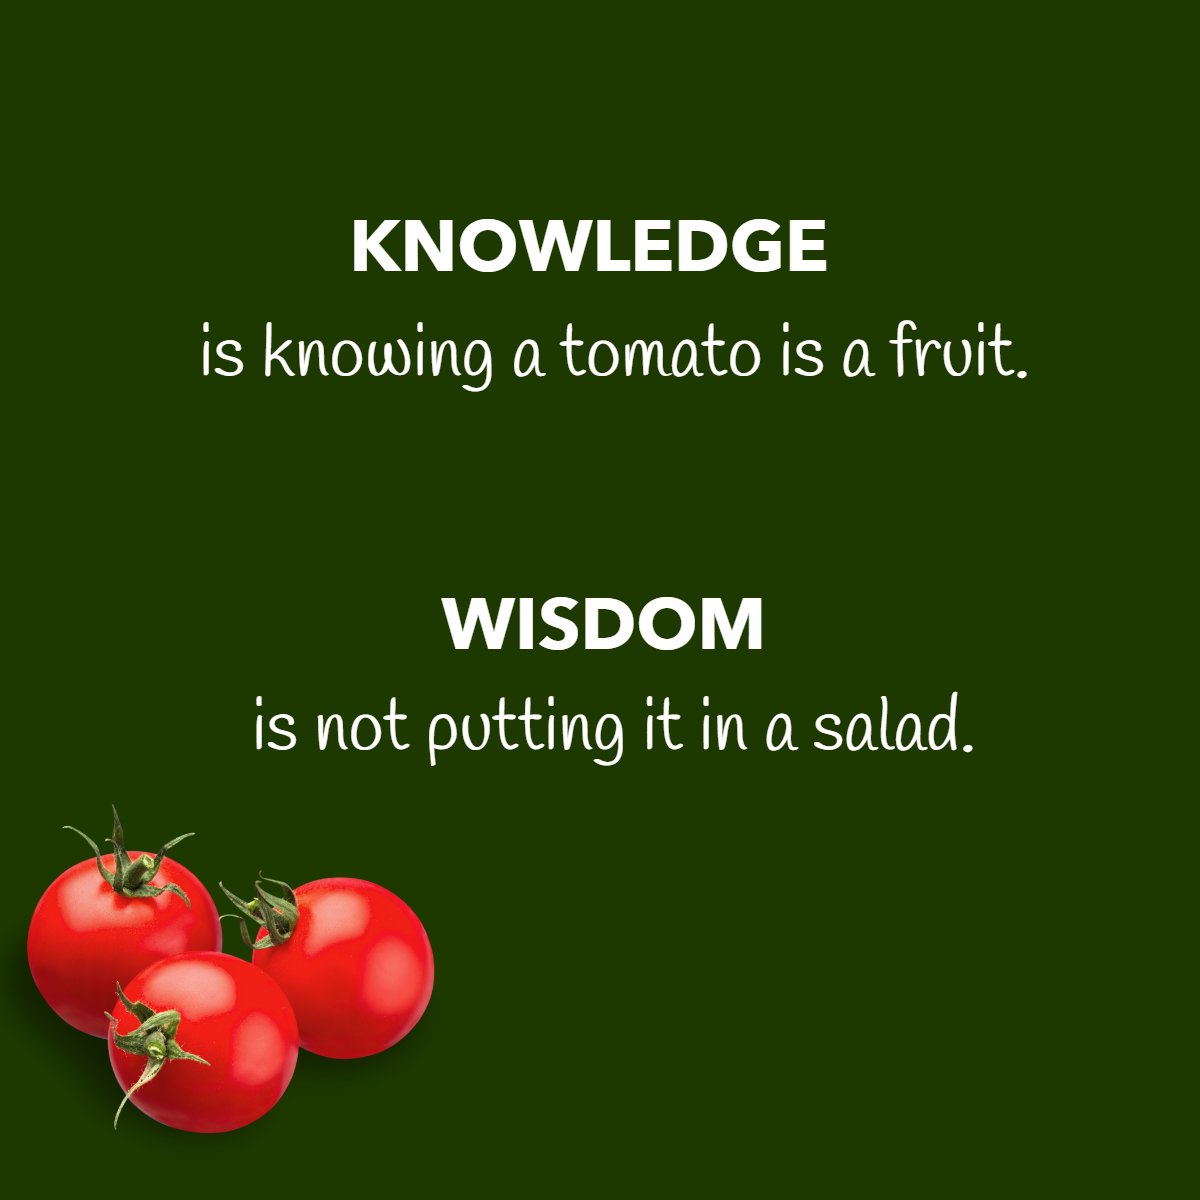 Philosophy is wondering if that means ketchup is a smoothie. 🤔🍅

#tomatoisafruit  #salad  #fruit  #tomatoes  #smoothie  #ketchup  #fruitoftheday